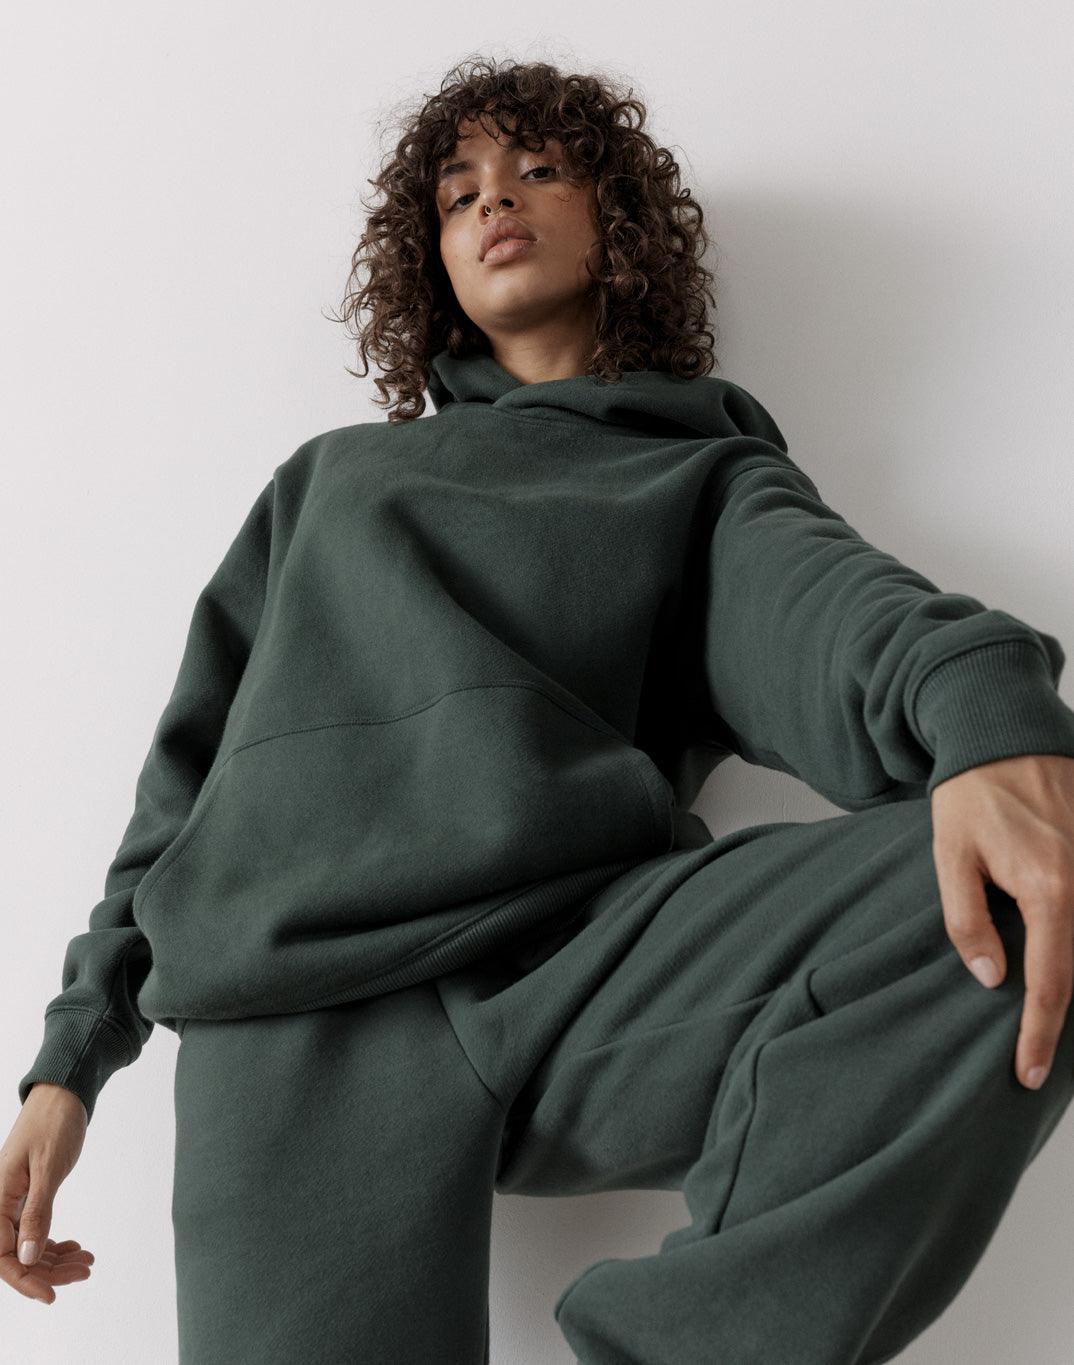 The Oversized Pullover Hoodie in Earth Green - Hoodies - Gym+Coffee IE